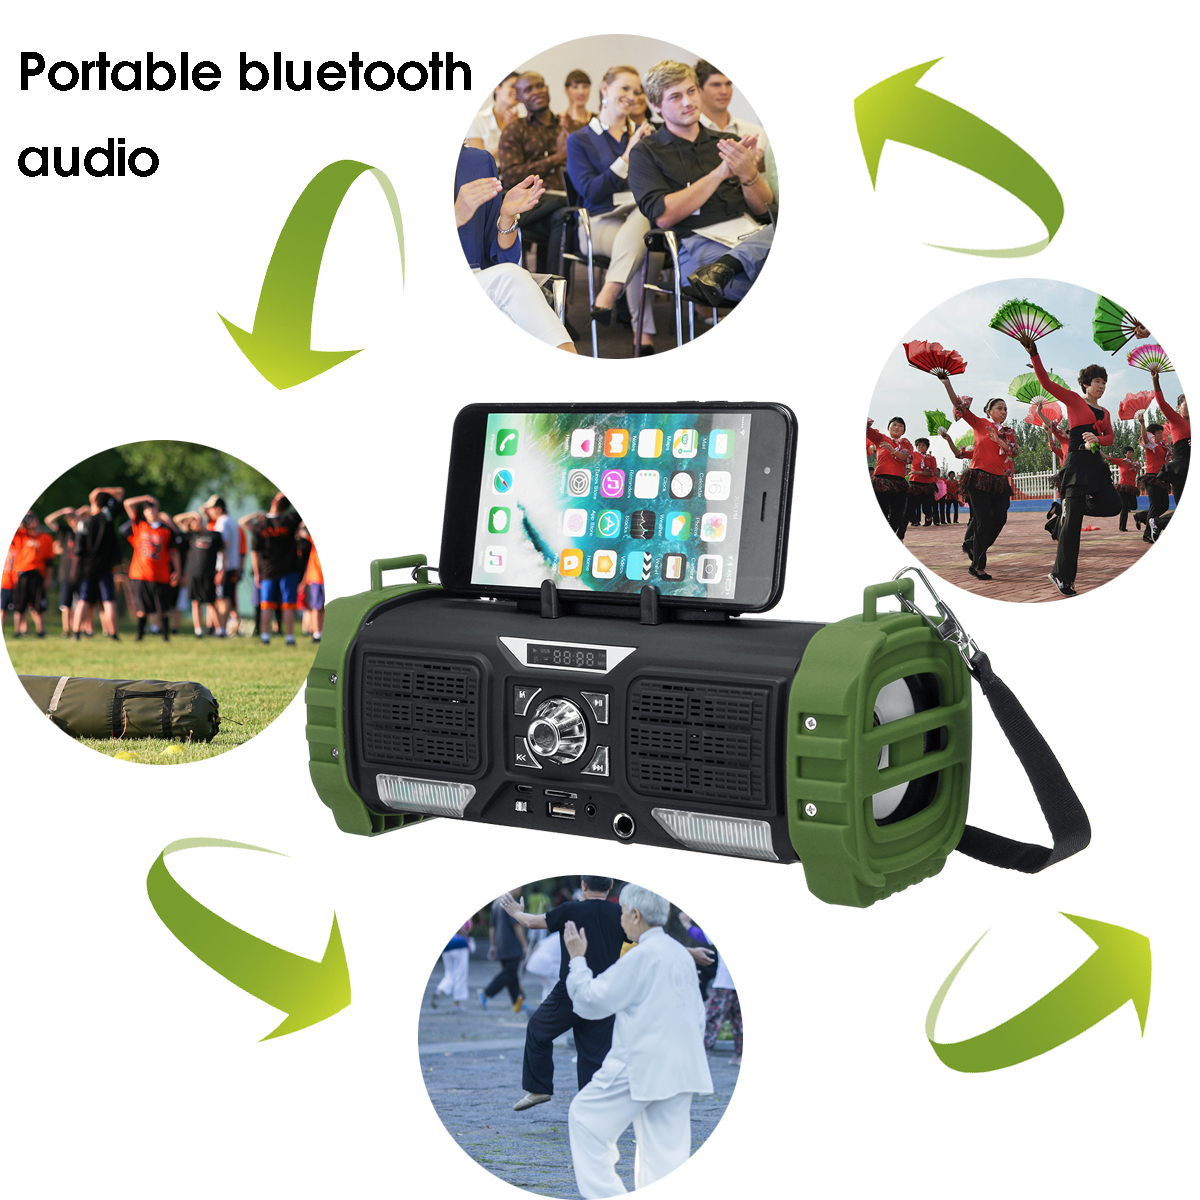 Portable-Wireless-bluetooth-Speaker-LED-Light-Heavy-Bass-2200mAh-TF-Card-Speaker-with-Mic-with-Phone-1503608-3